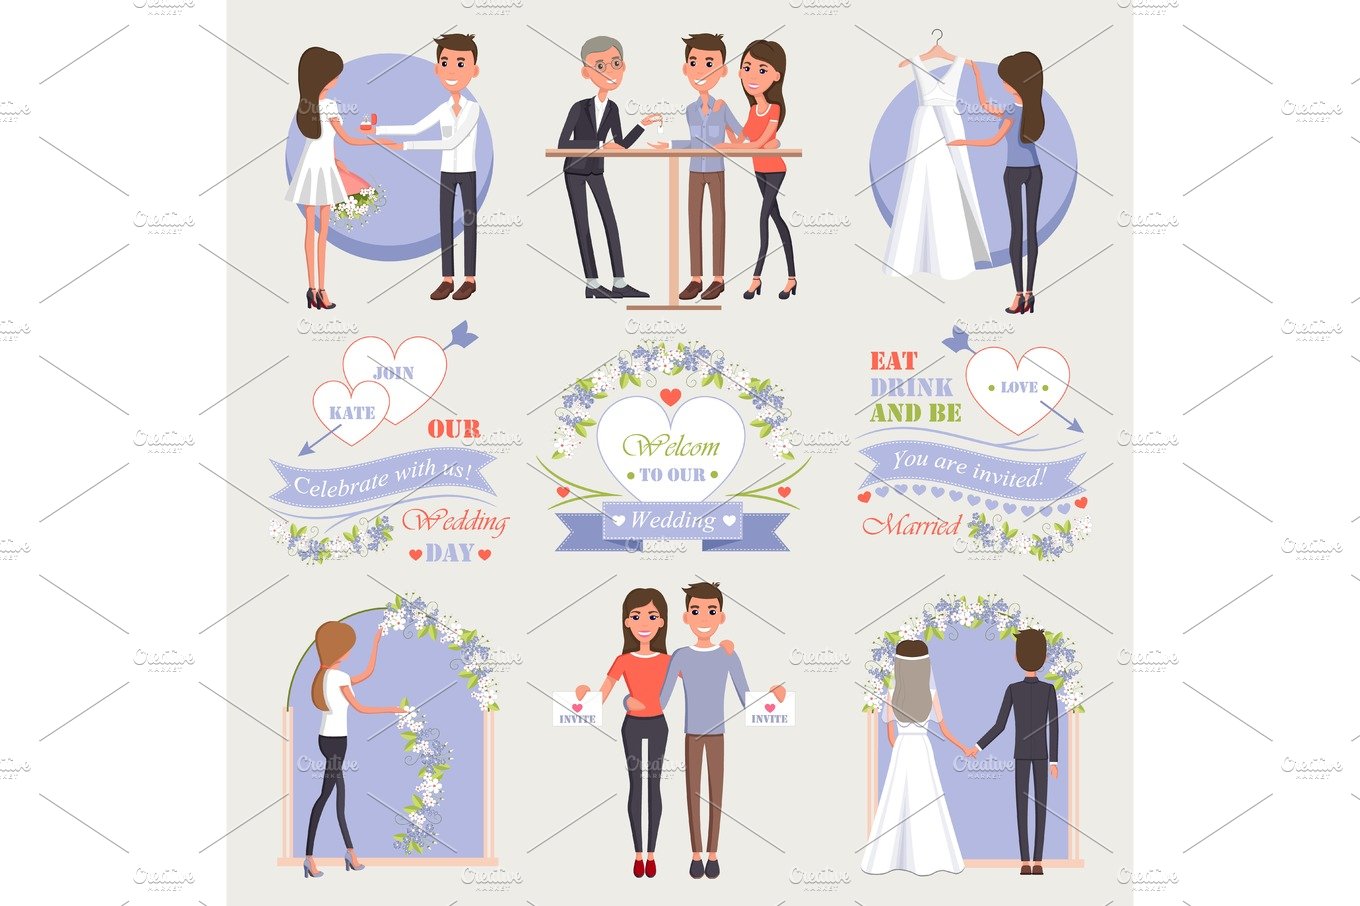 Welcome to Our Wedding Isolated Illustrations Set cover image.